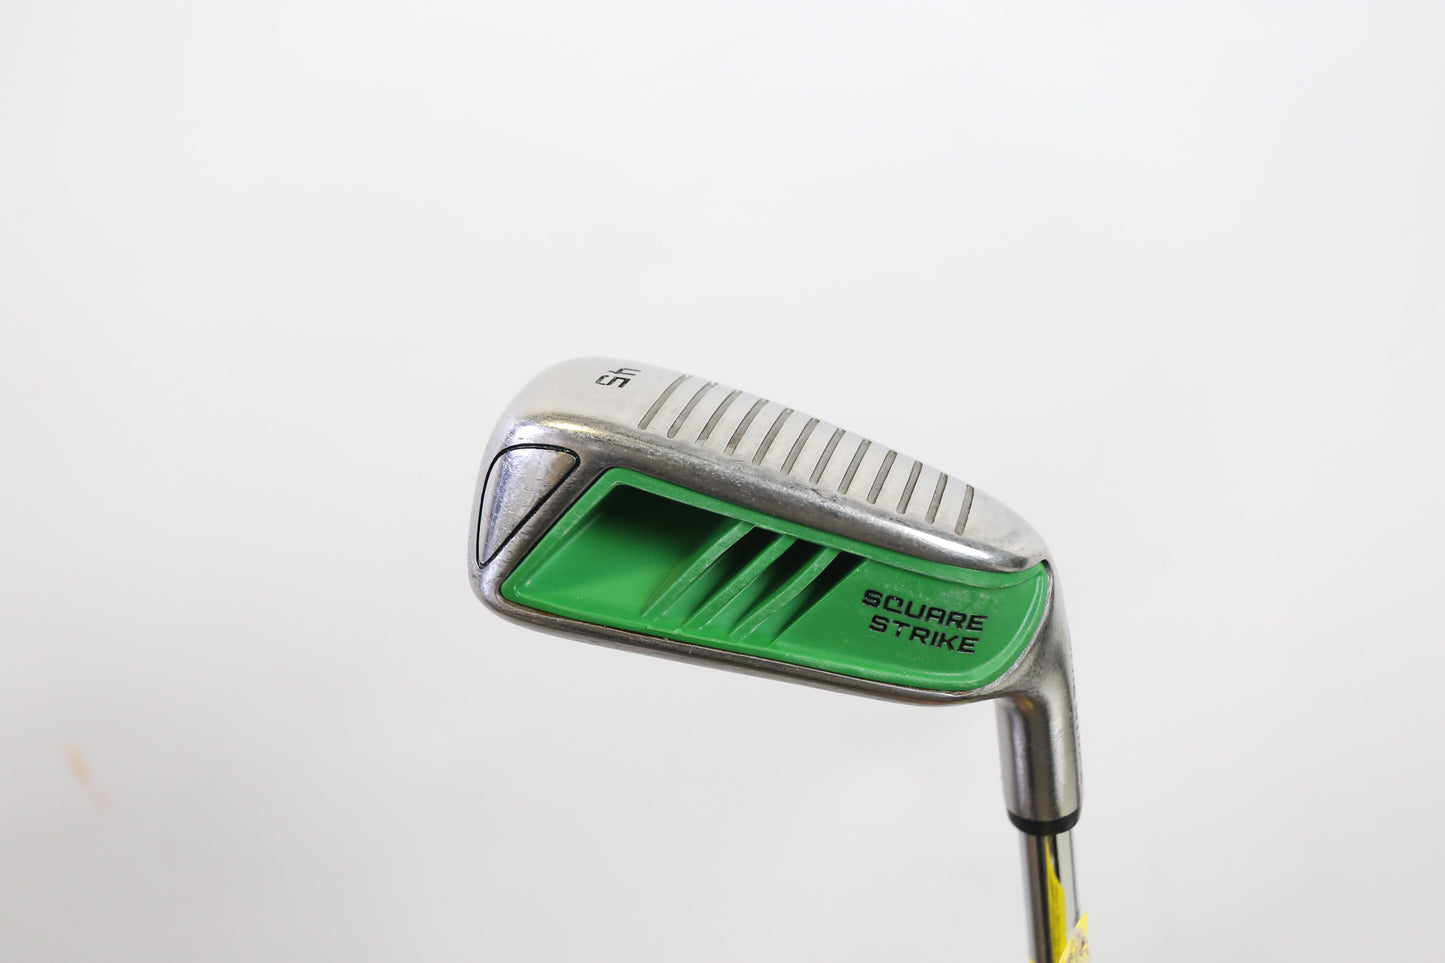 Used Square Strike Square Strike Pitching Wedge - Right-Handed - 45 Degrees - Stiff Flex